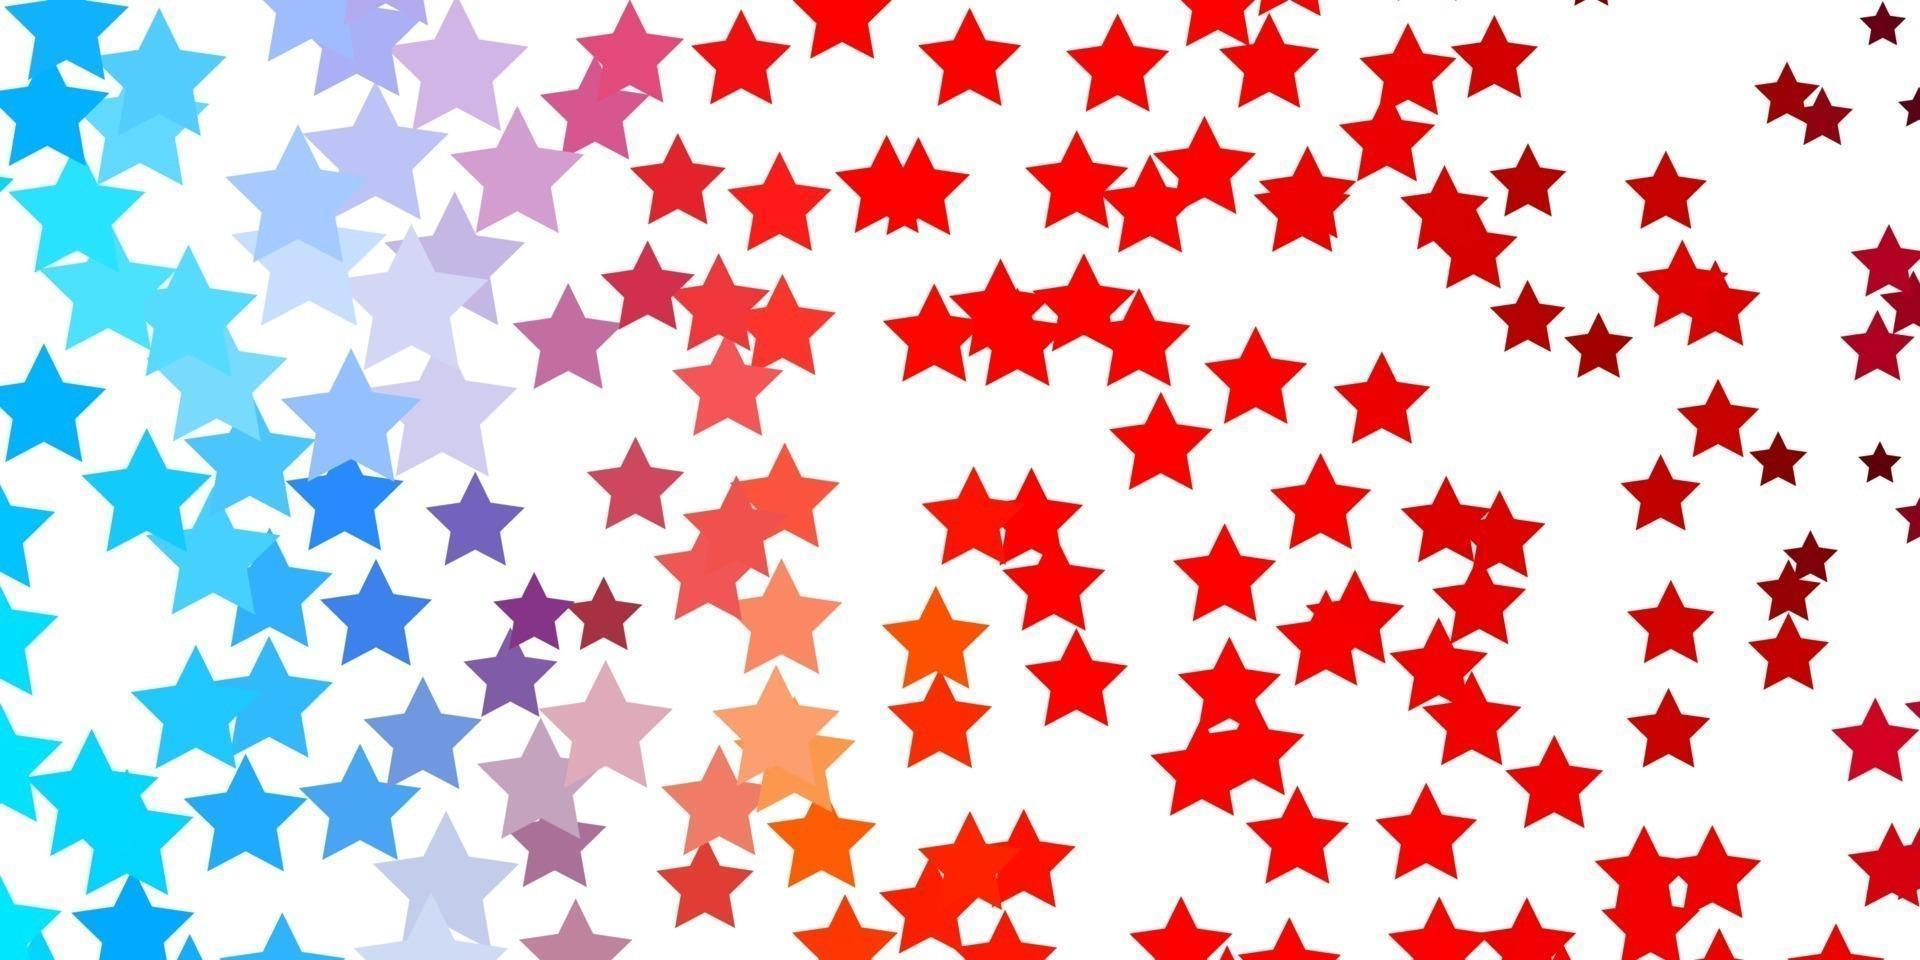 Light Multicolor vector background with colorful stars.